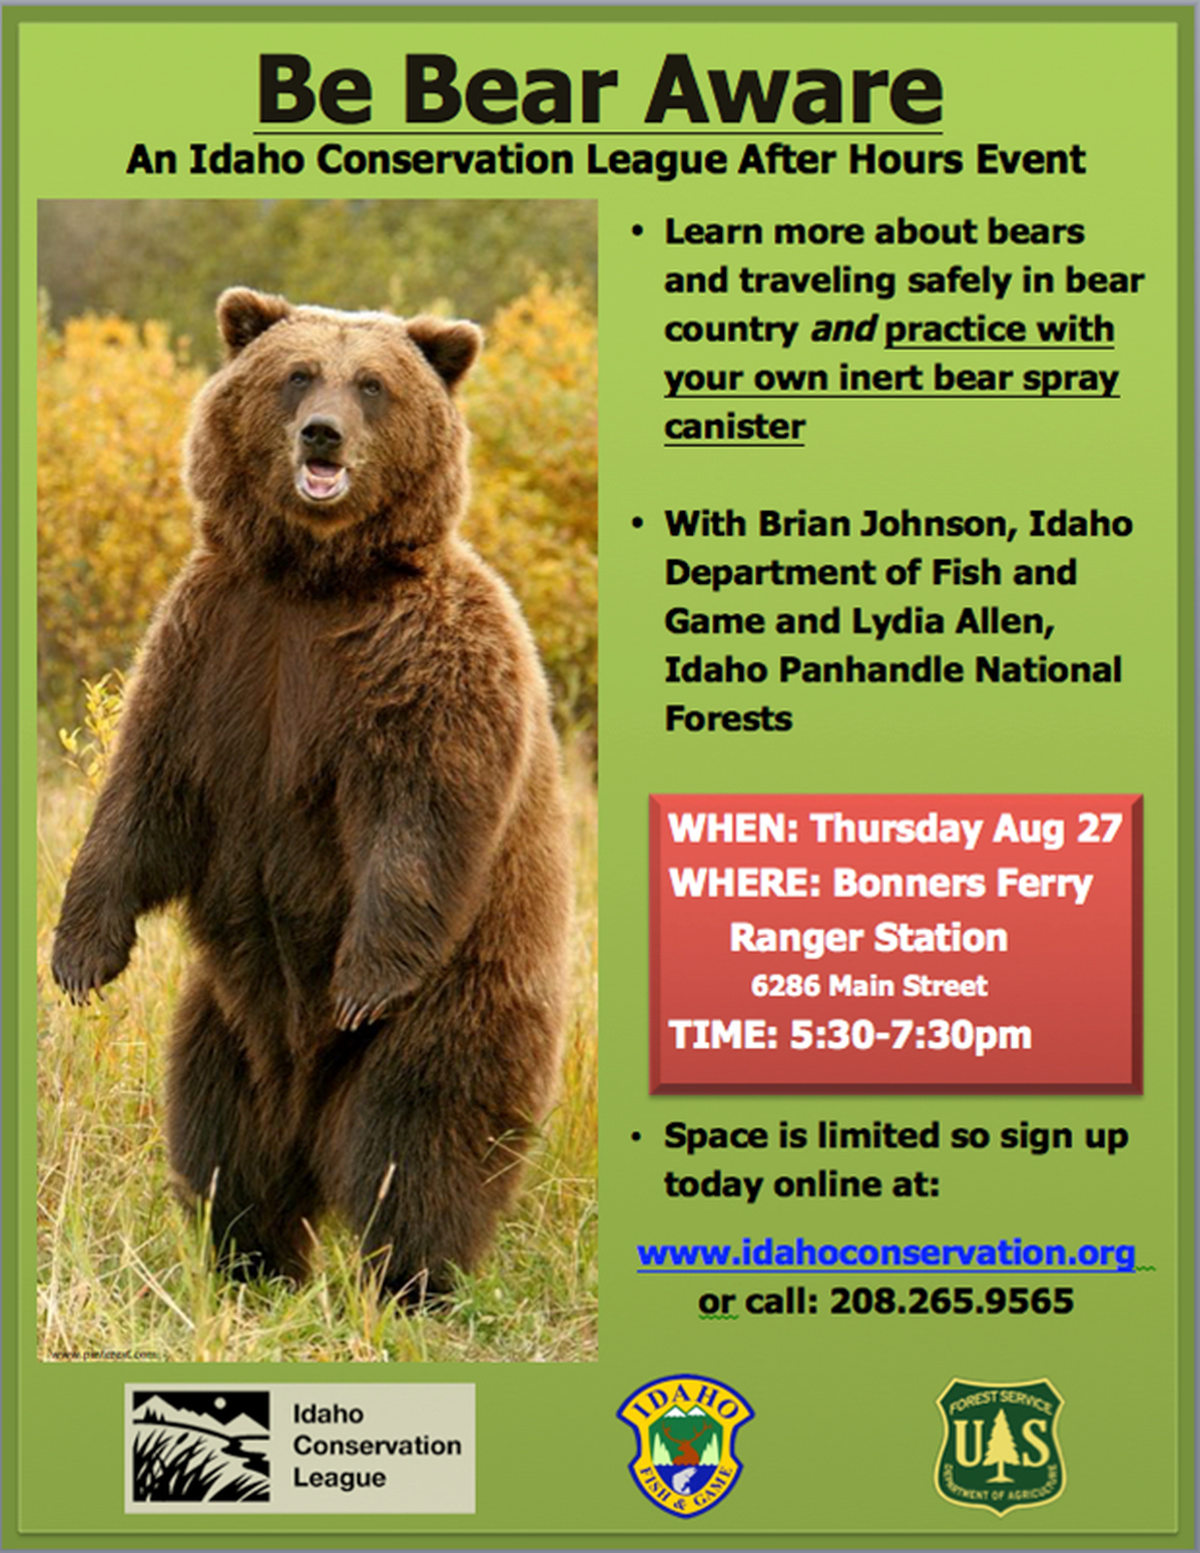 Be Bear Aware program Aug. 27 in Bonners Ferry | The Spokesman-Review